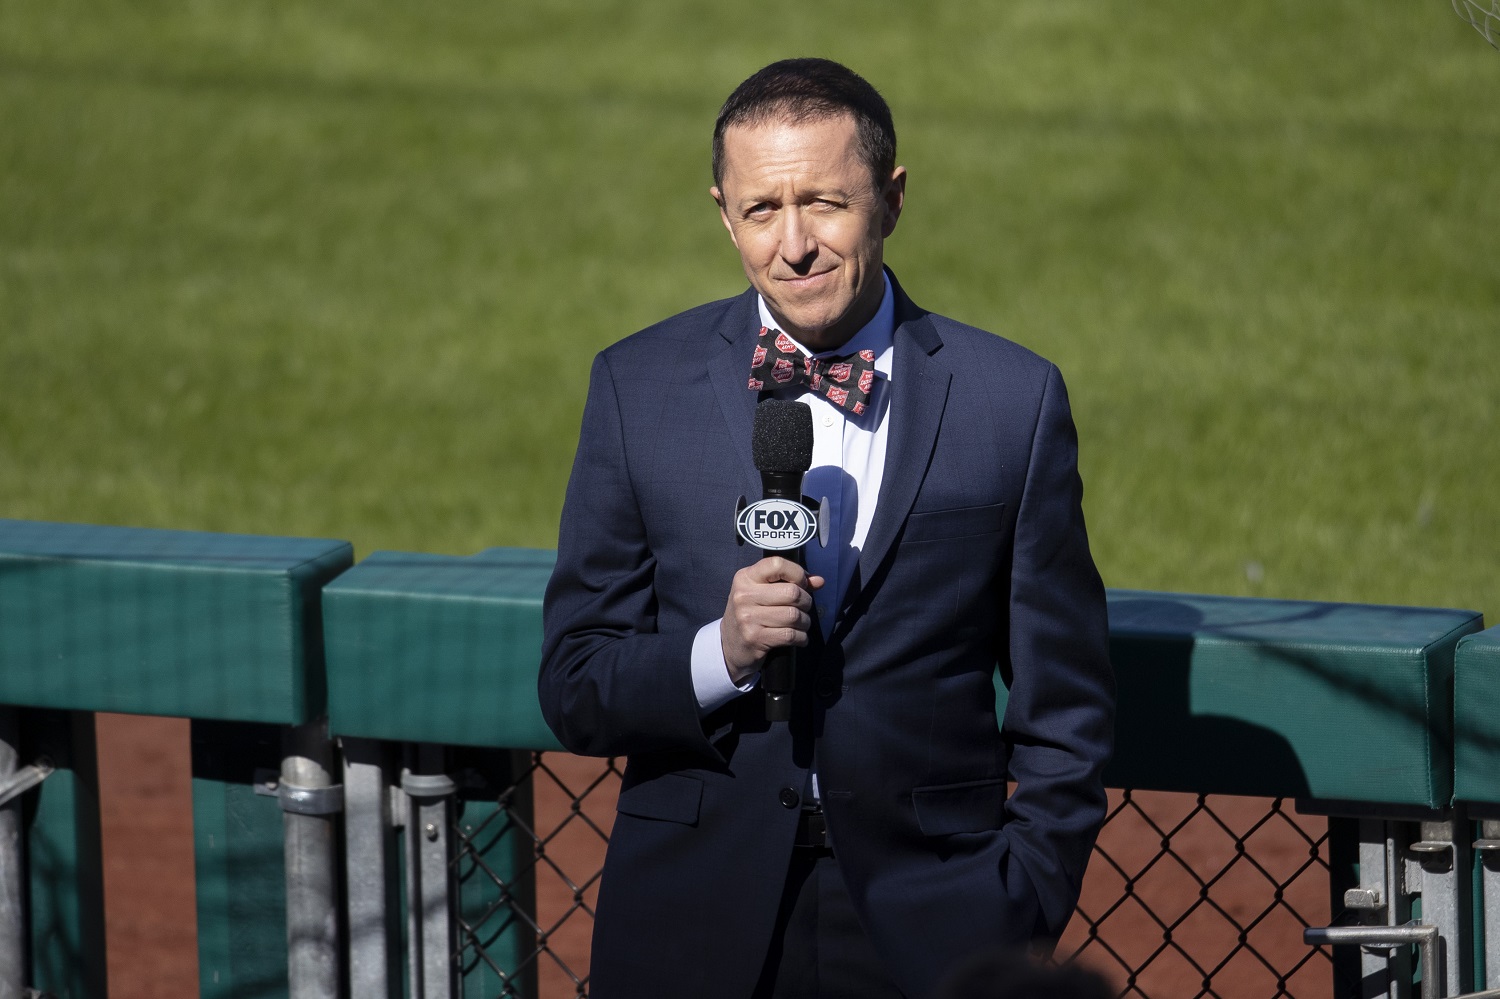 MLB Threw a Beanball at No. 1 Insider Ken Rosenthal, and It Will Probably Backfire